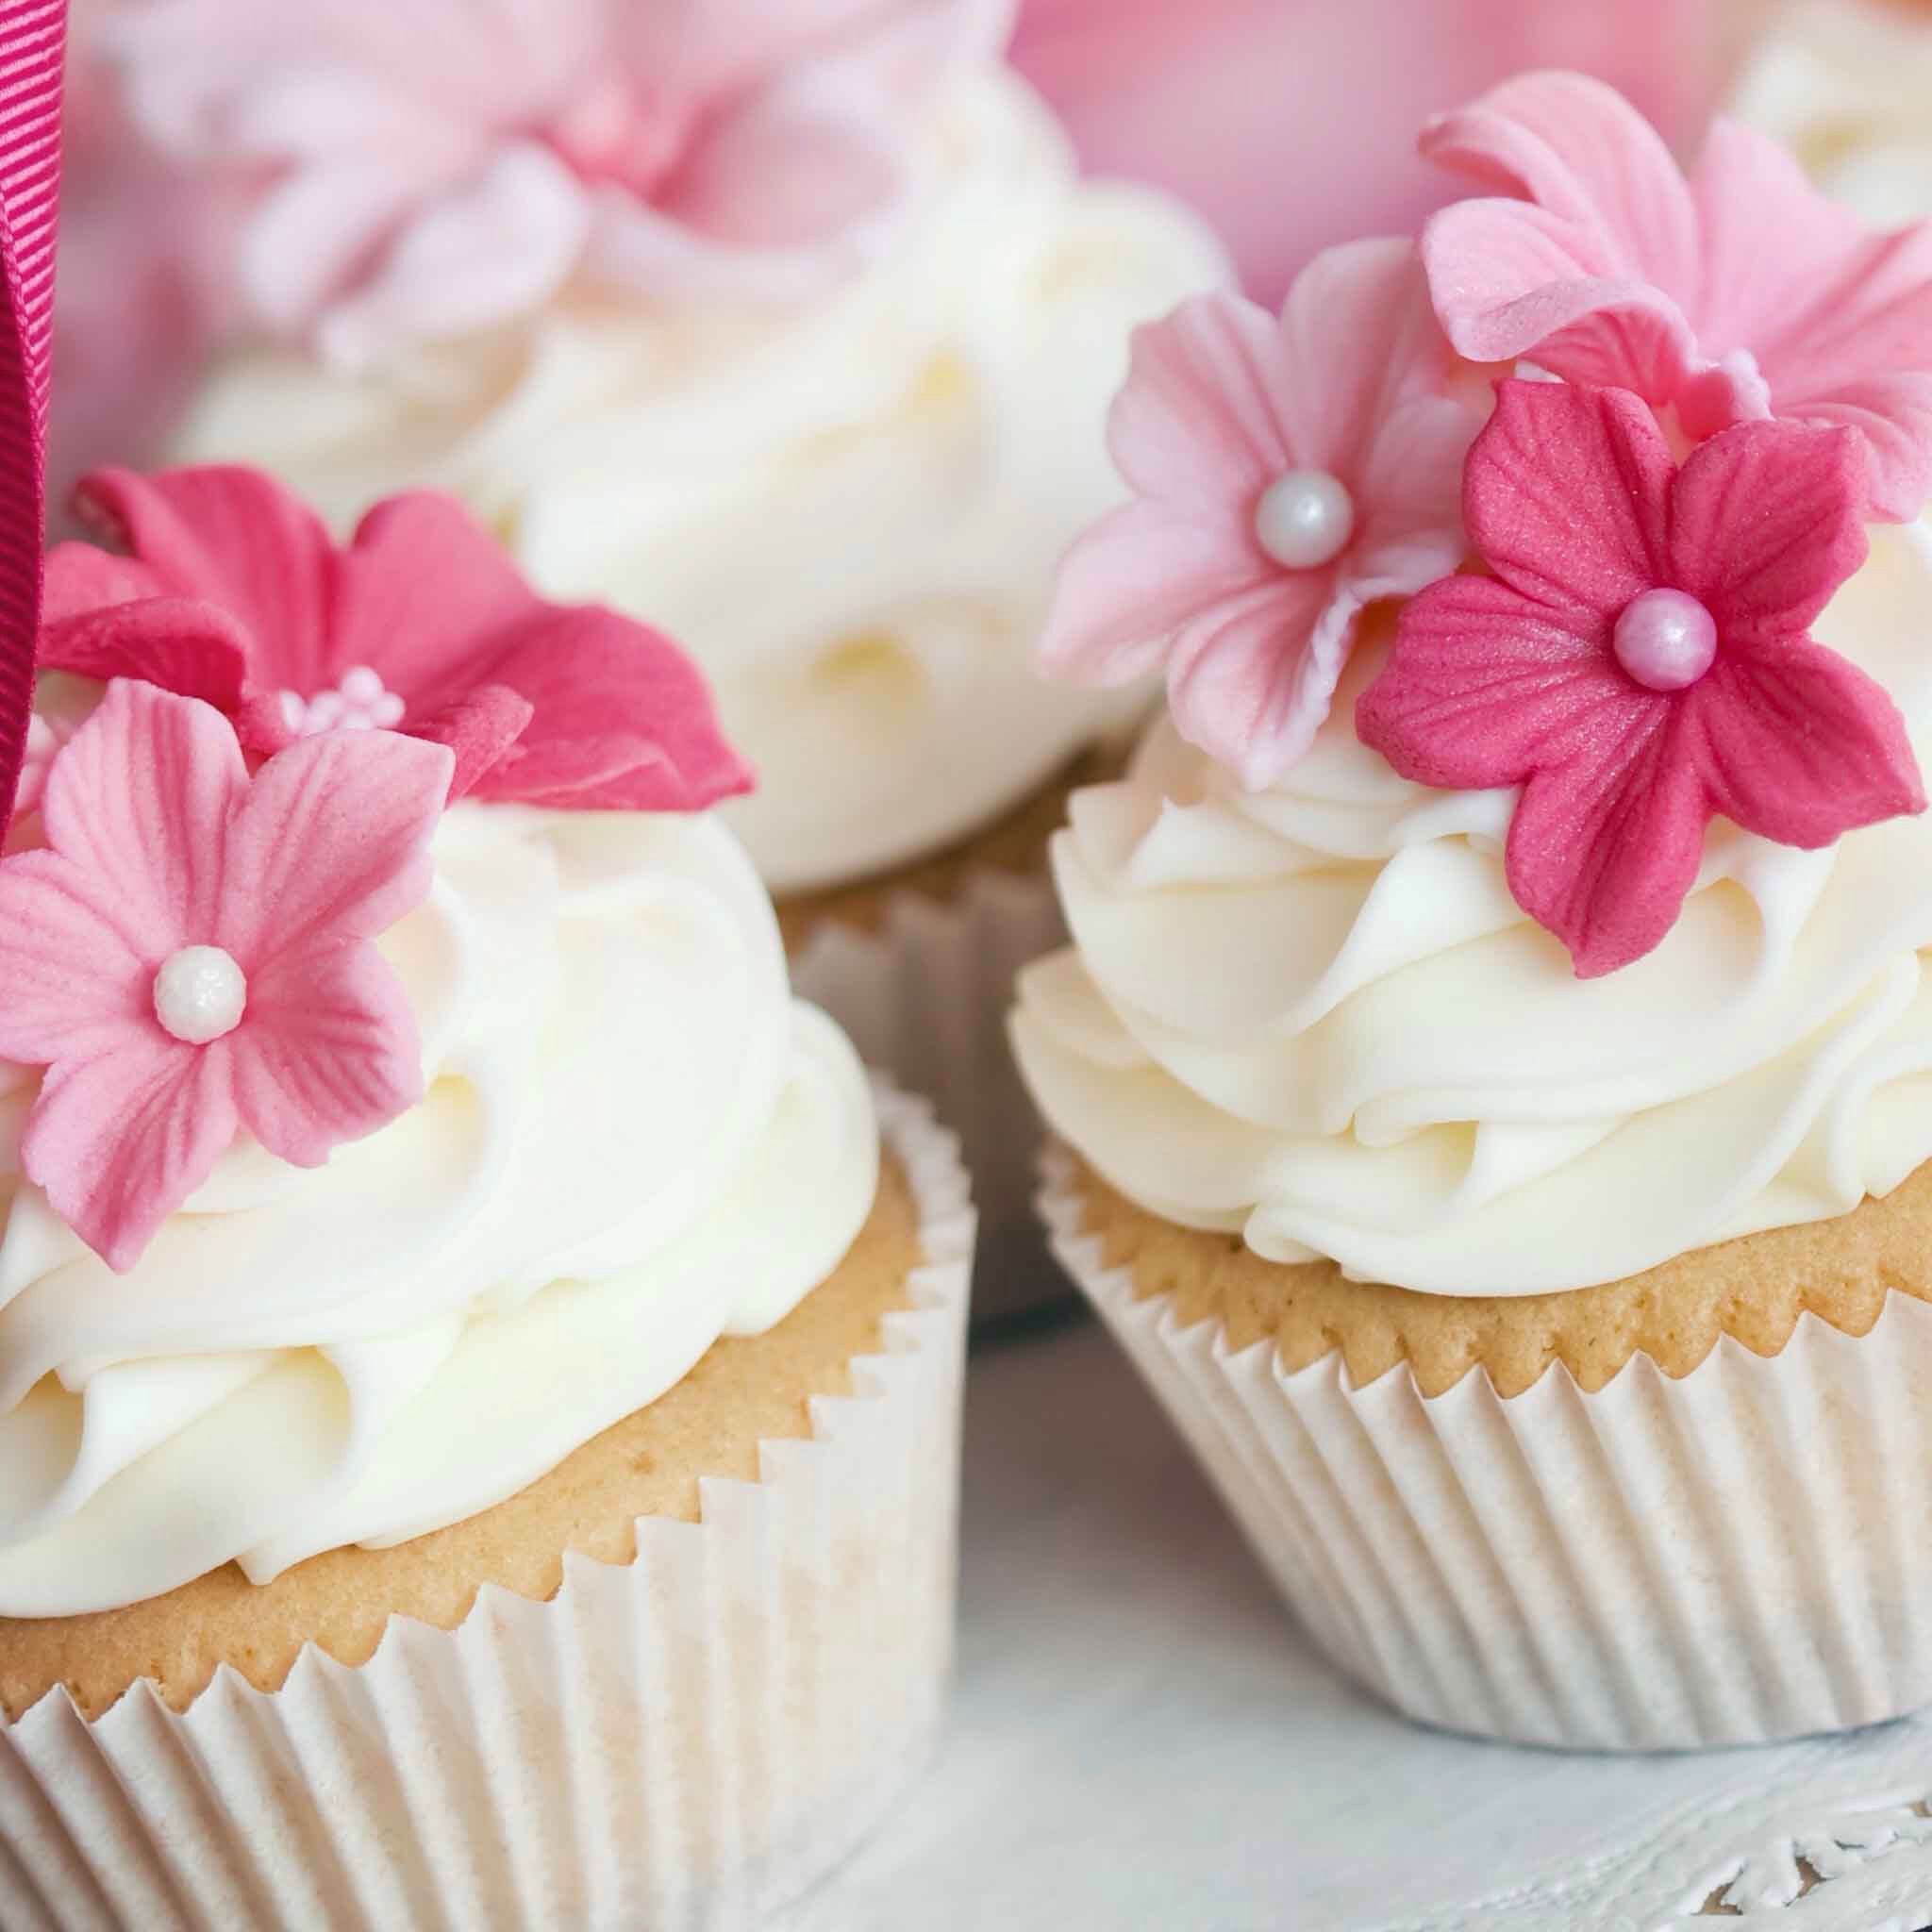 A close up of cupcakes with pink flowers on top - Cupcakes